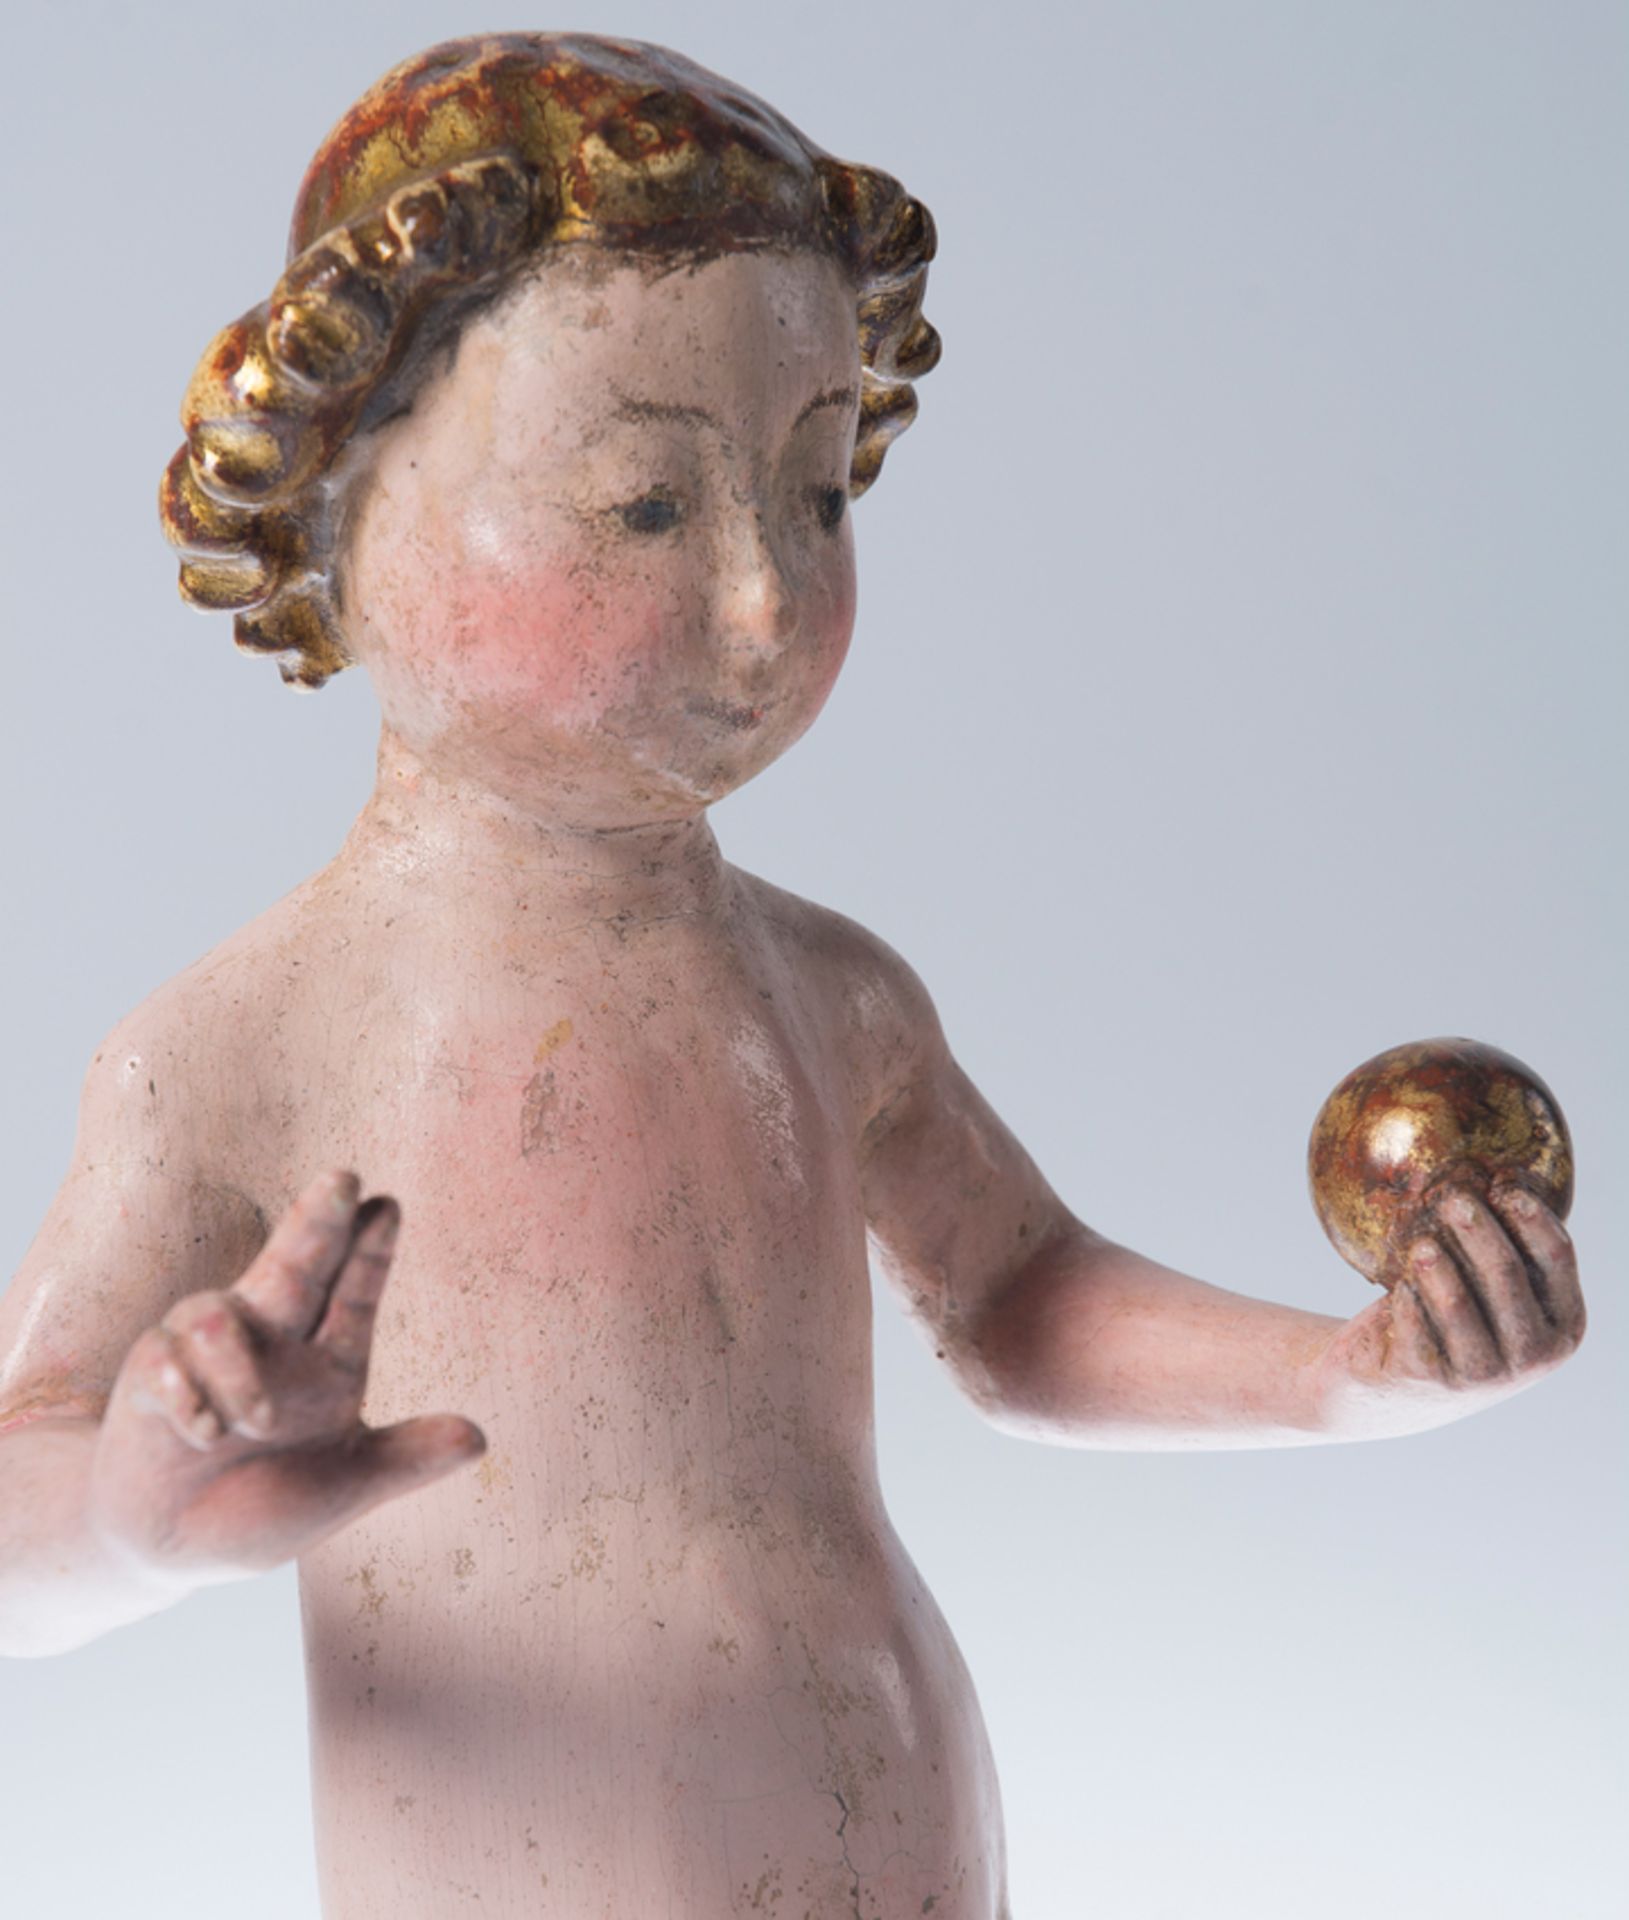 "Christ Child". Carved, polychromed and gilded wooden sculpture. Flemish School. Mechelen. 16th cent - Image 6 of 8